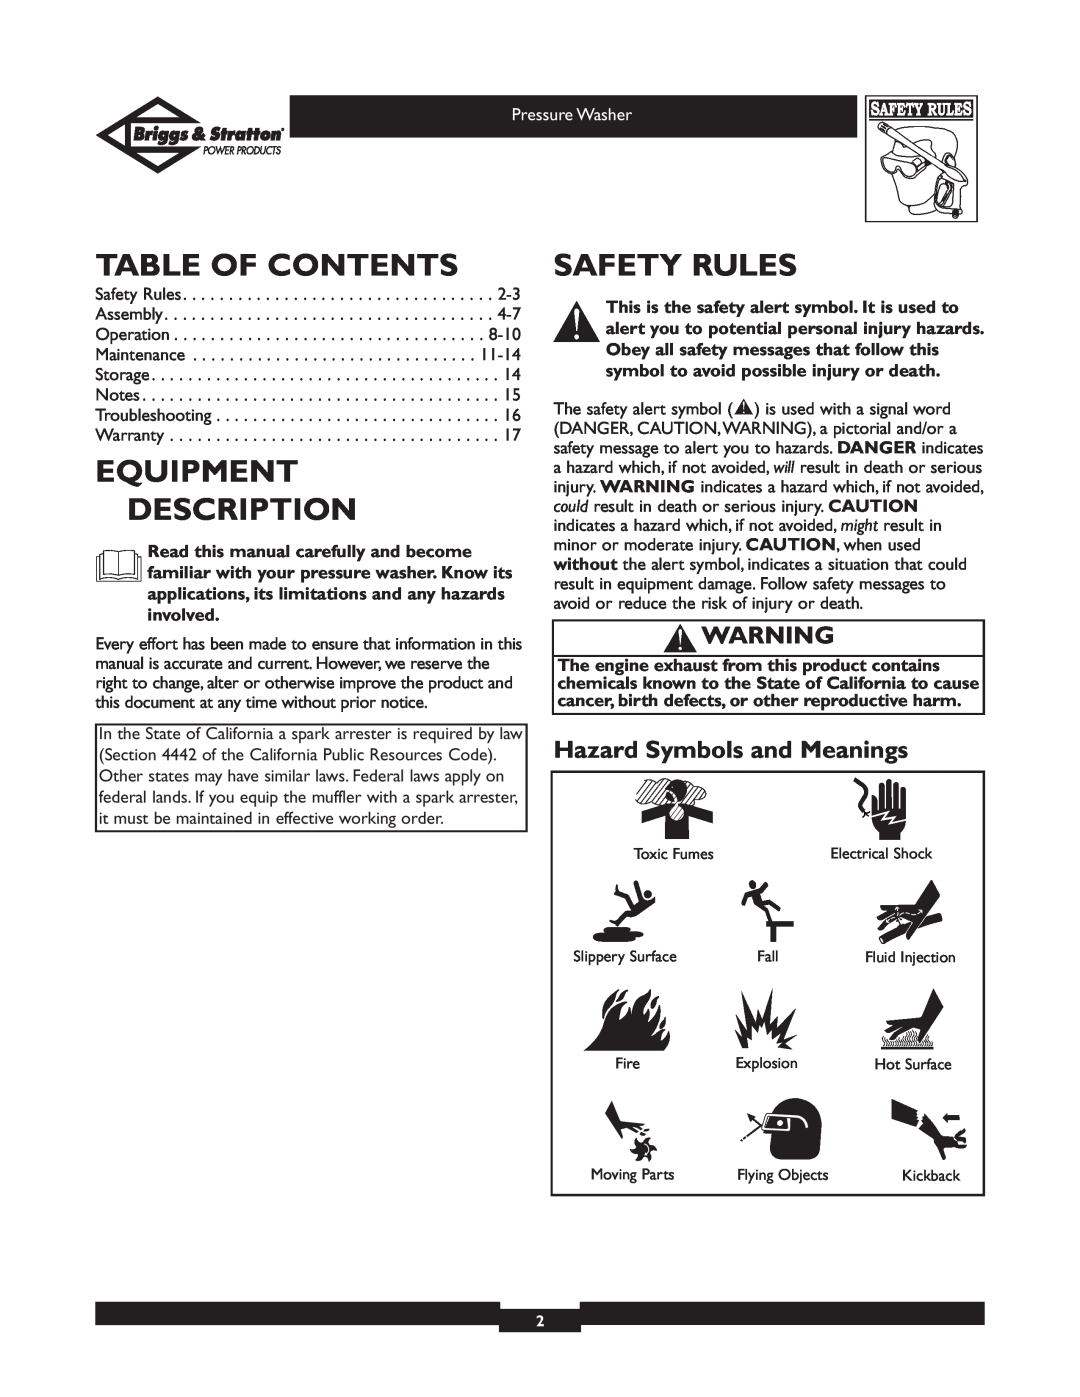 Briggs & Stratton 01805, 01806 Table Of Contents, Equipment Description, Safety Rules, Hazard Symbols and Meanings 